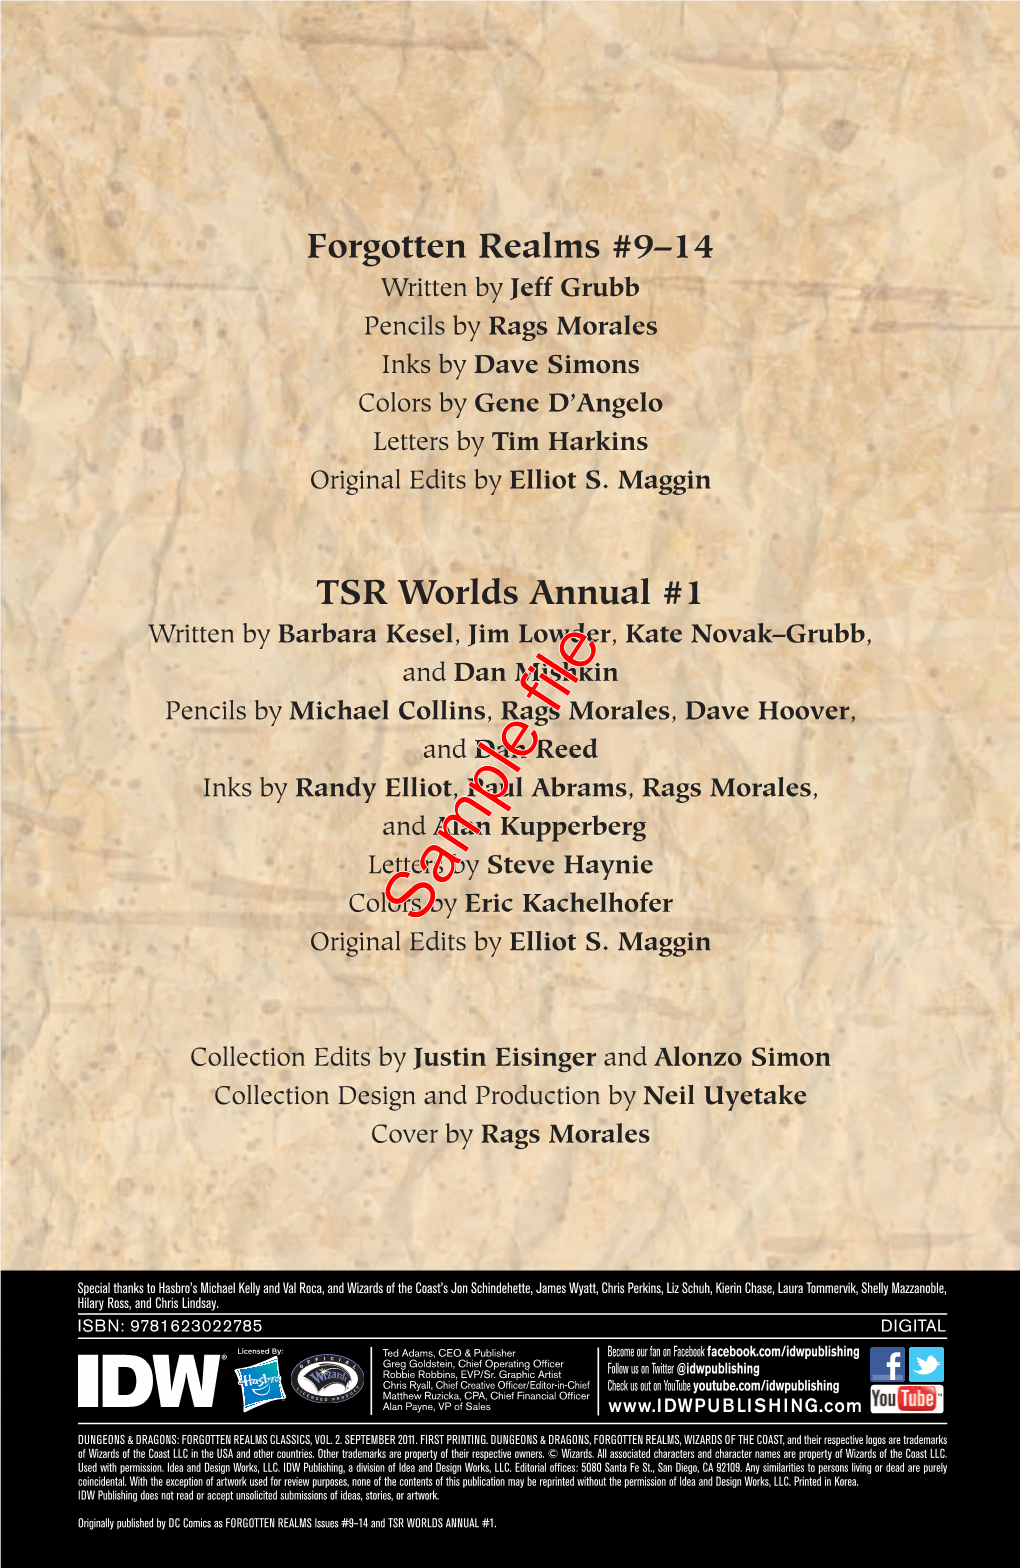 Sample File TSR Worlds Annual #1: